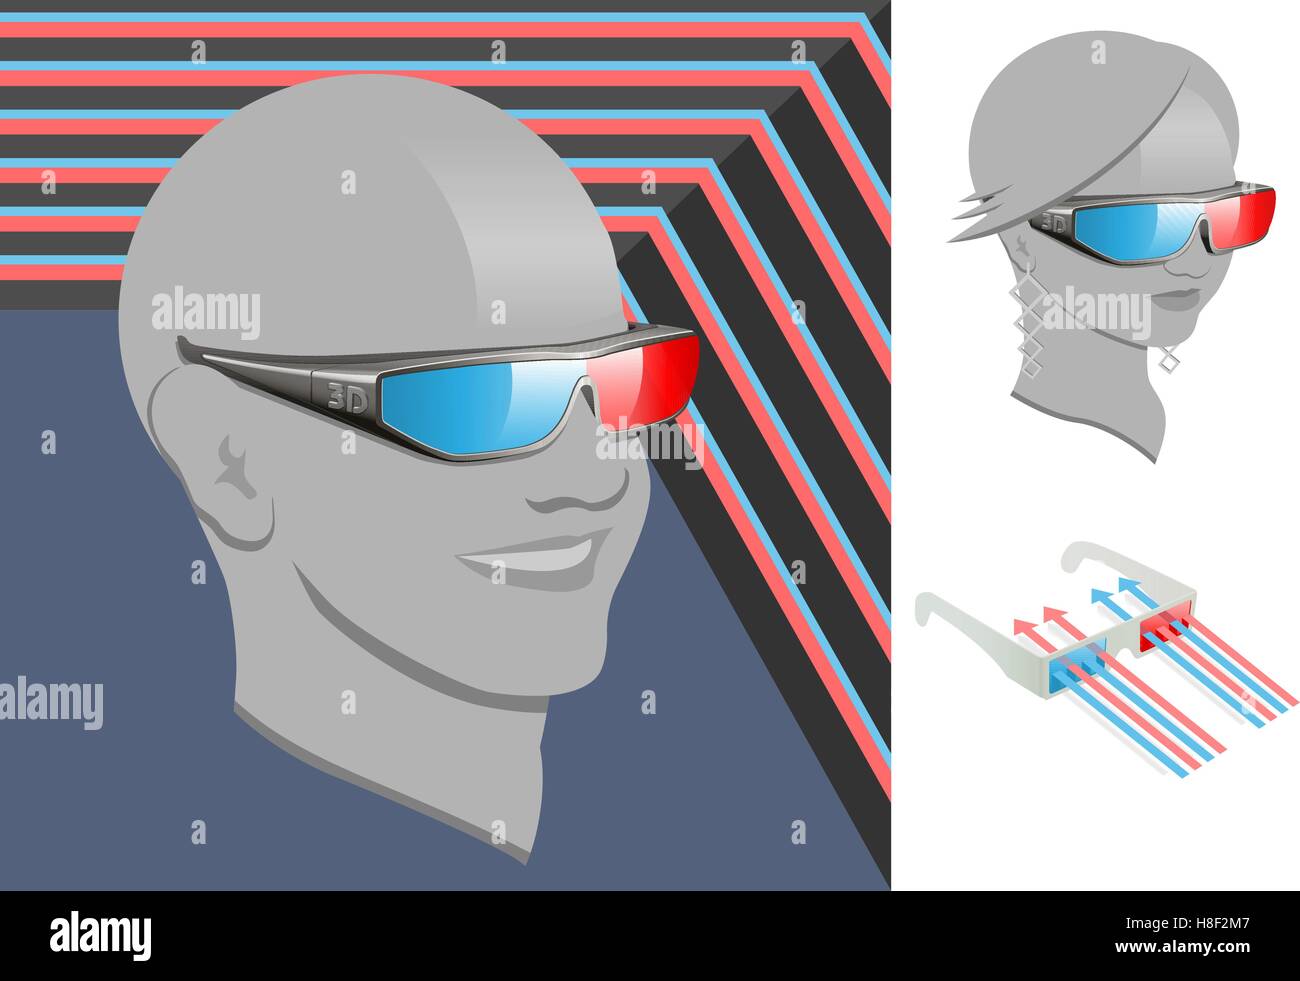 A male and female head using modern 3d glasses and traditional 3d glasses illustrating how the 3d glasses filter light. Stock Vector